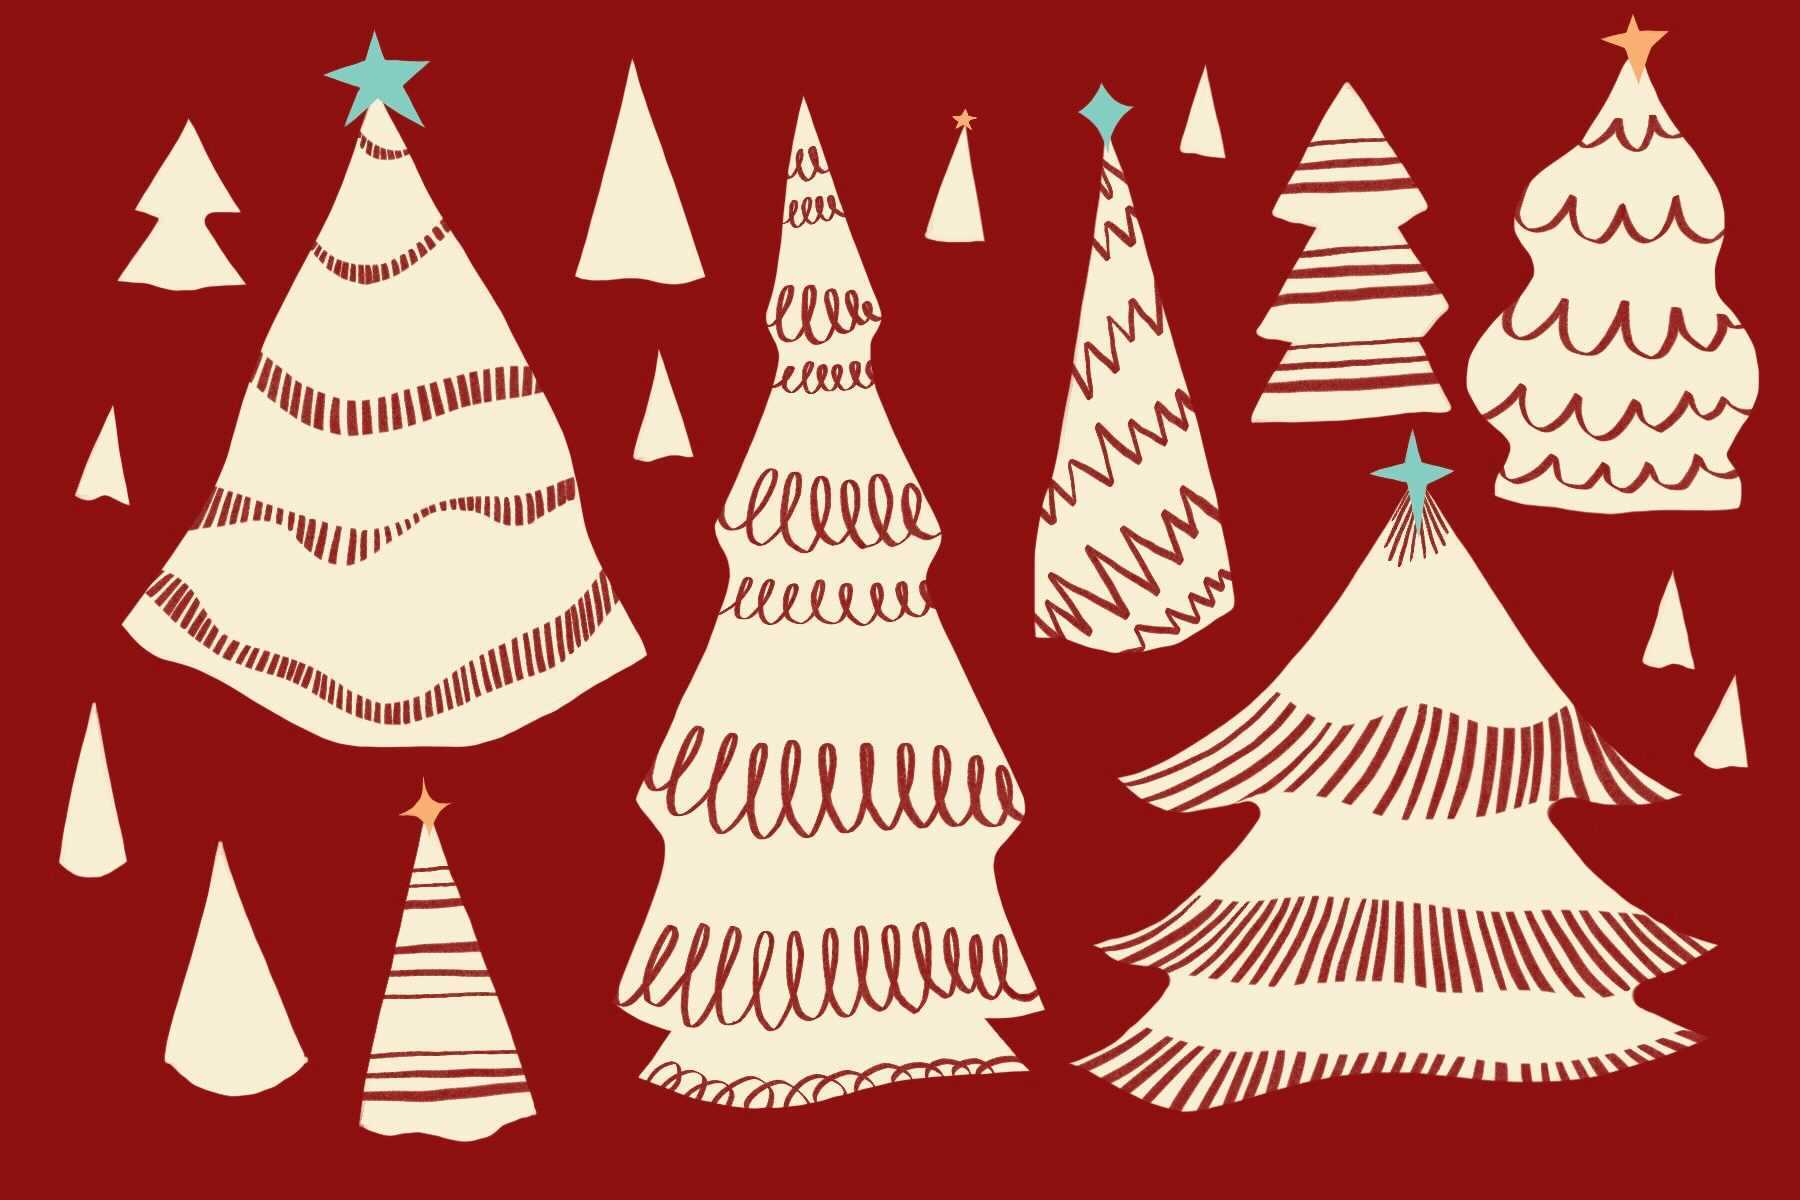 Illustrations of various different Christmas trees